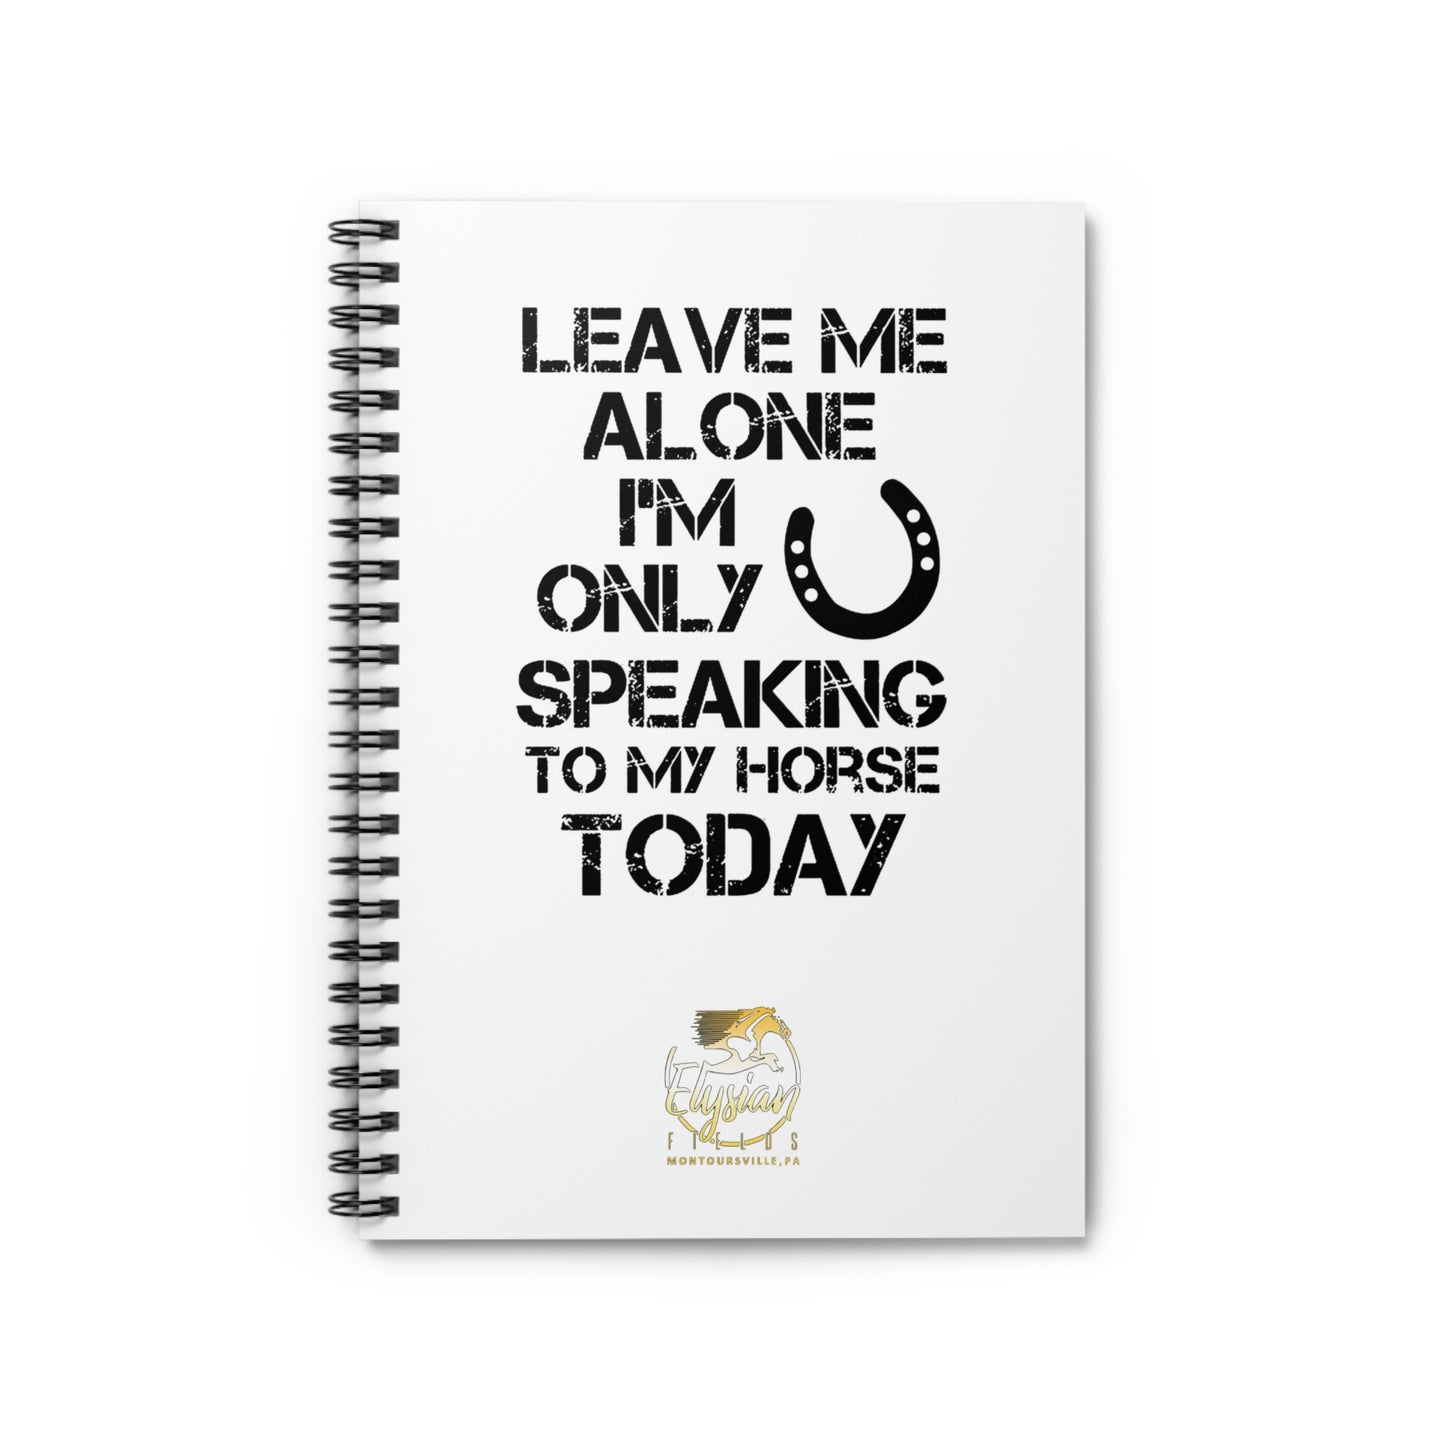 Leave Me Alone - Spiral Notebook - Ruled Line